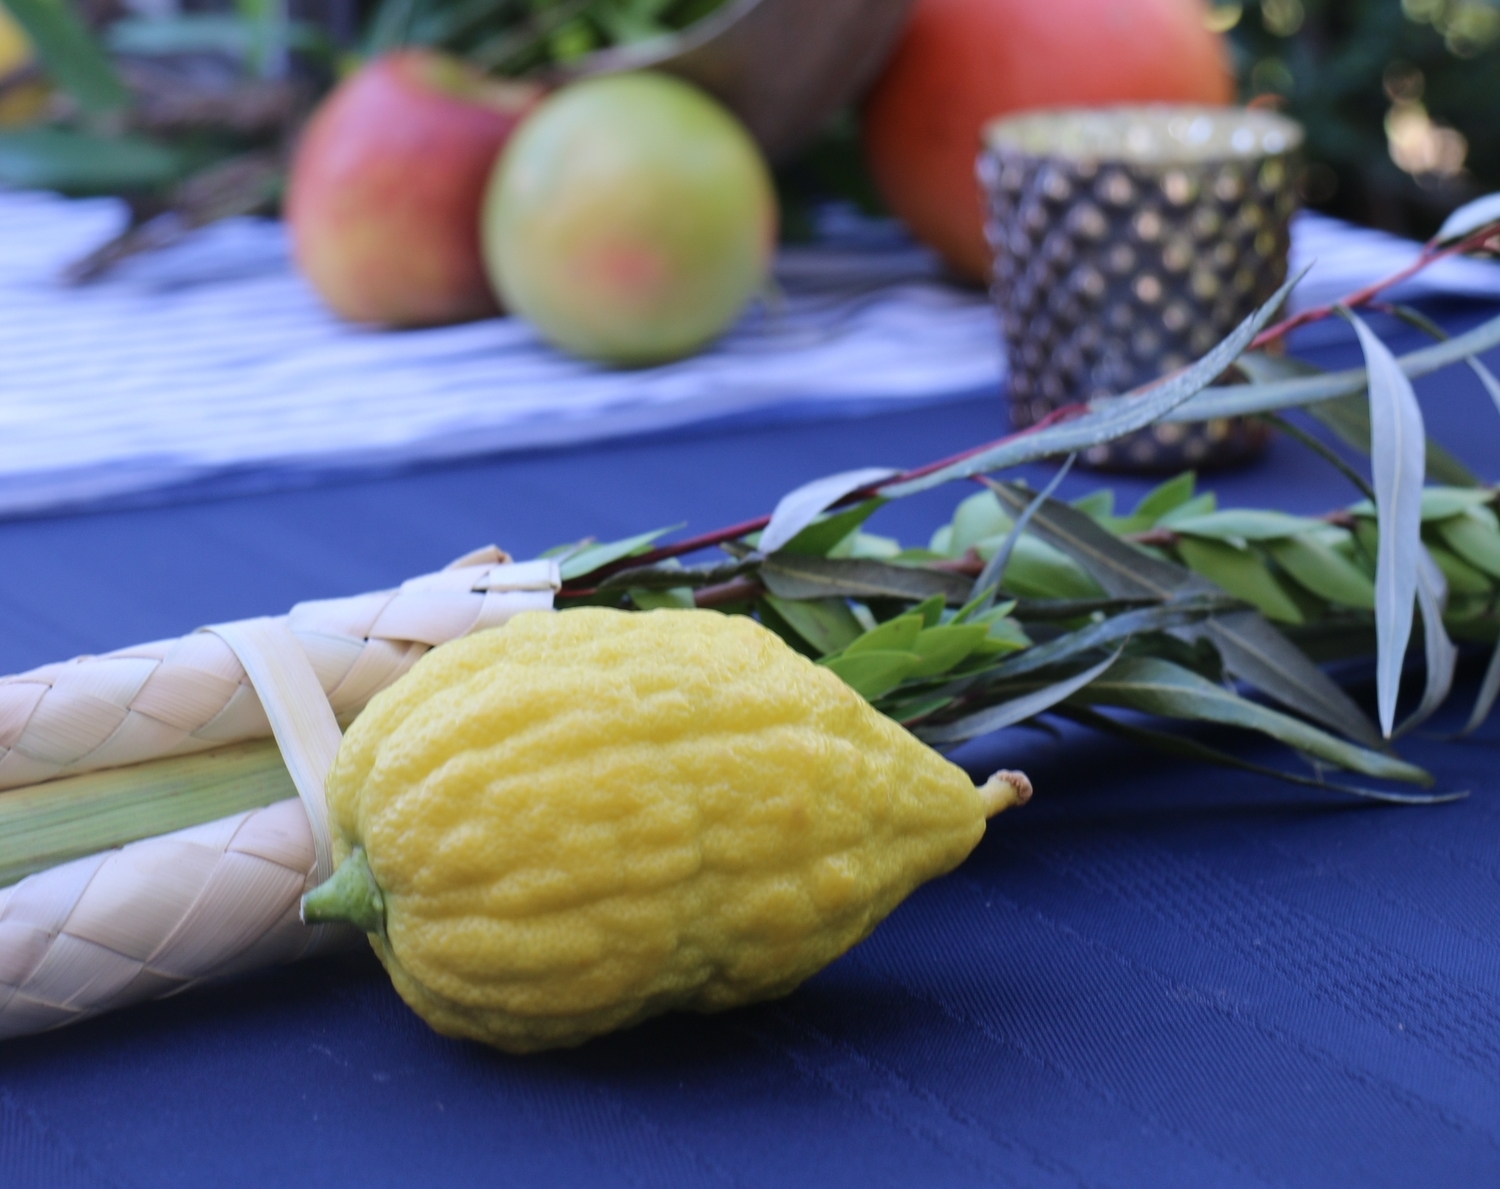 The Lulav and Etrog